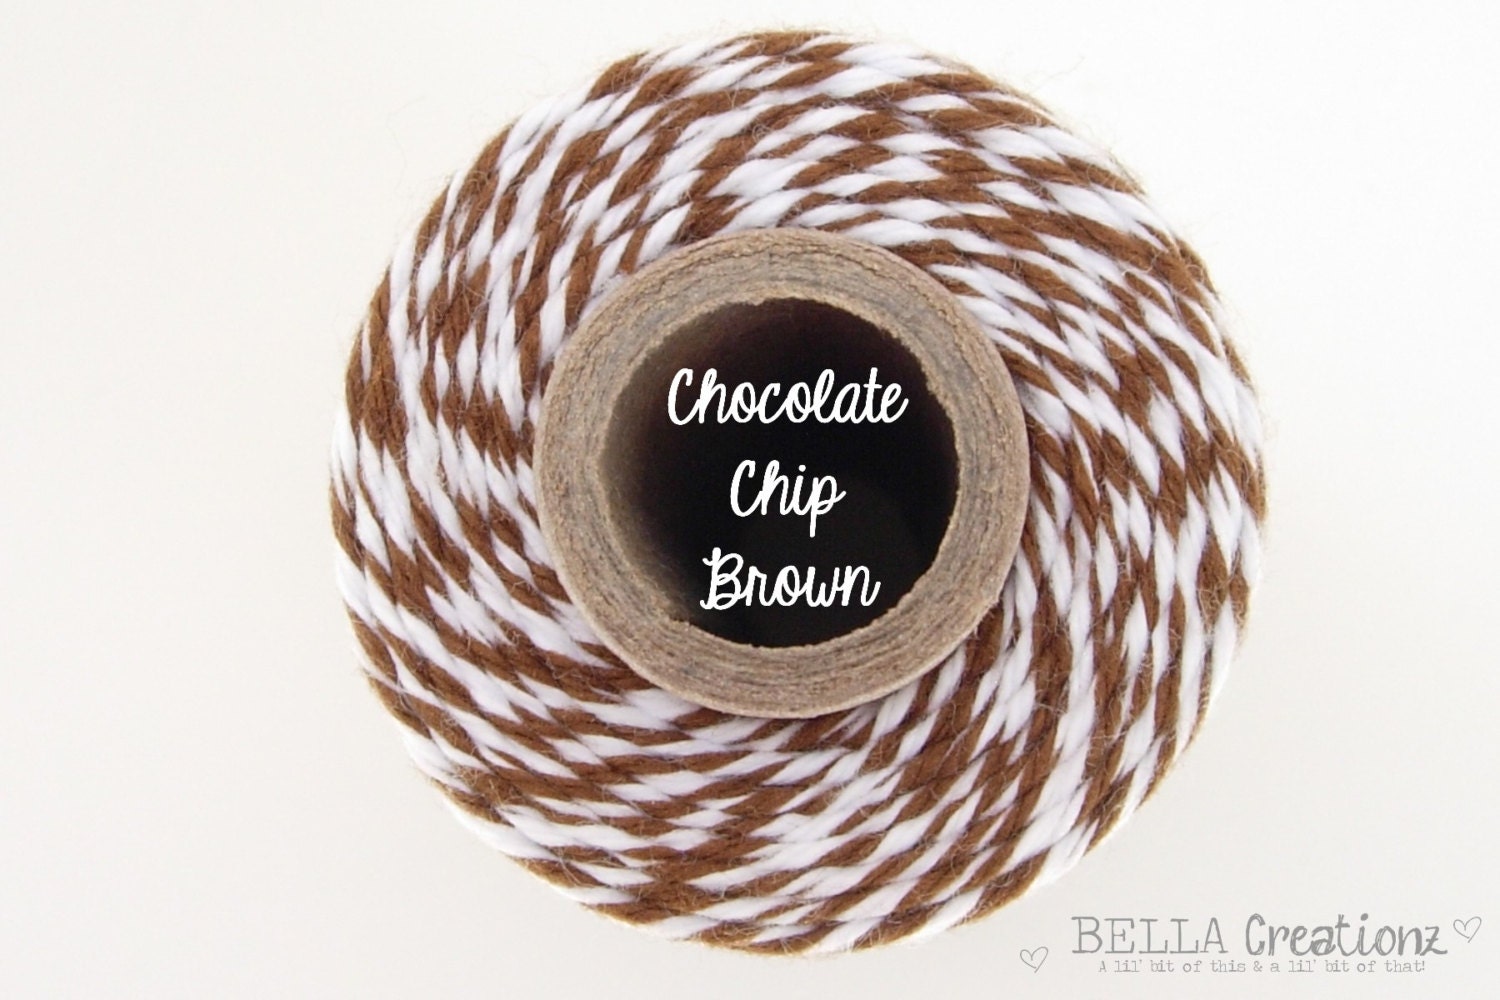 SALE - Chocolate Chip Brown Bakers Twine by Timeless Twine